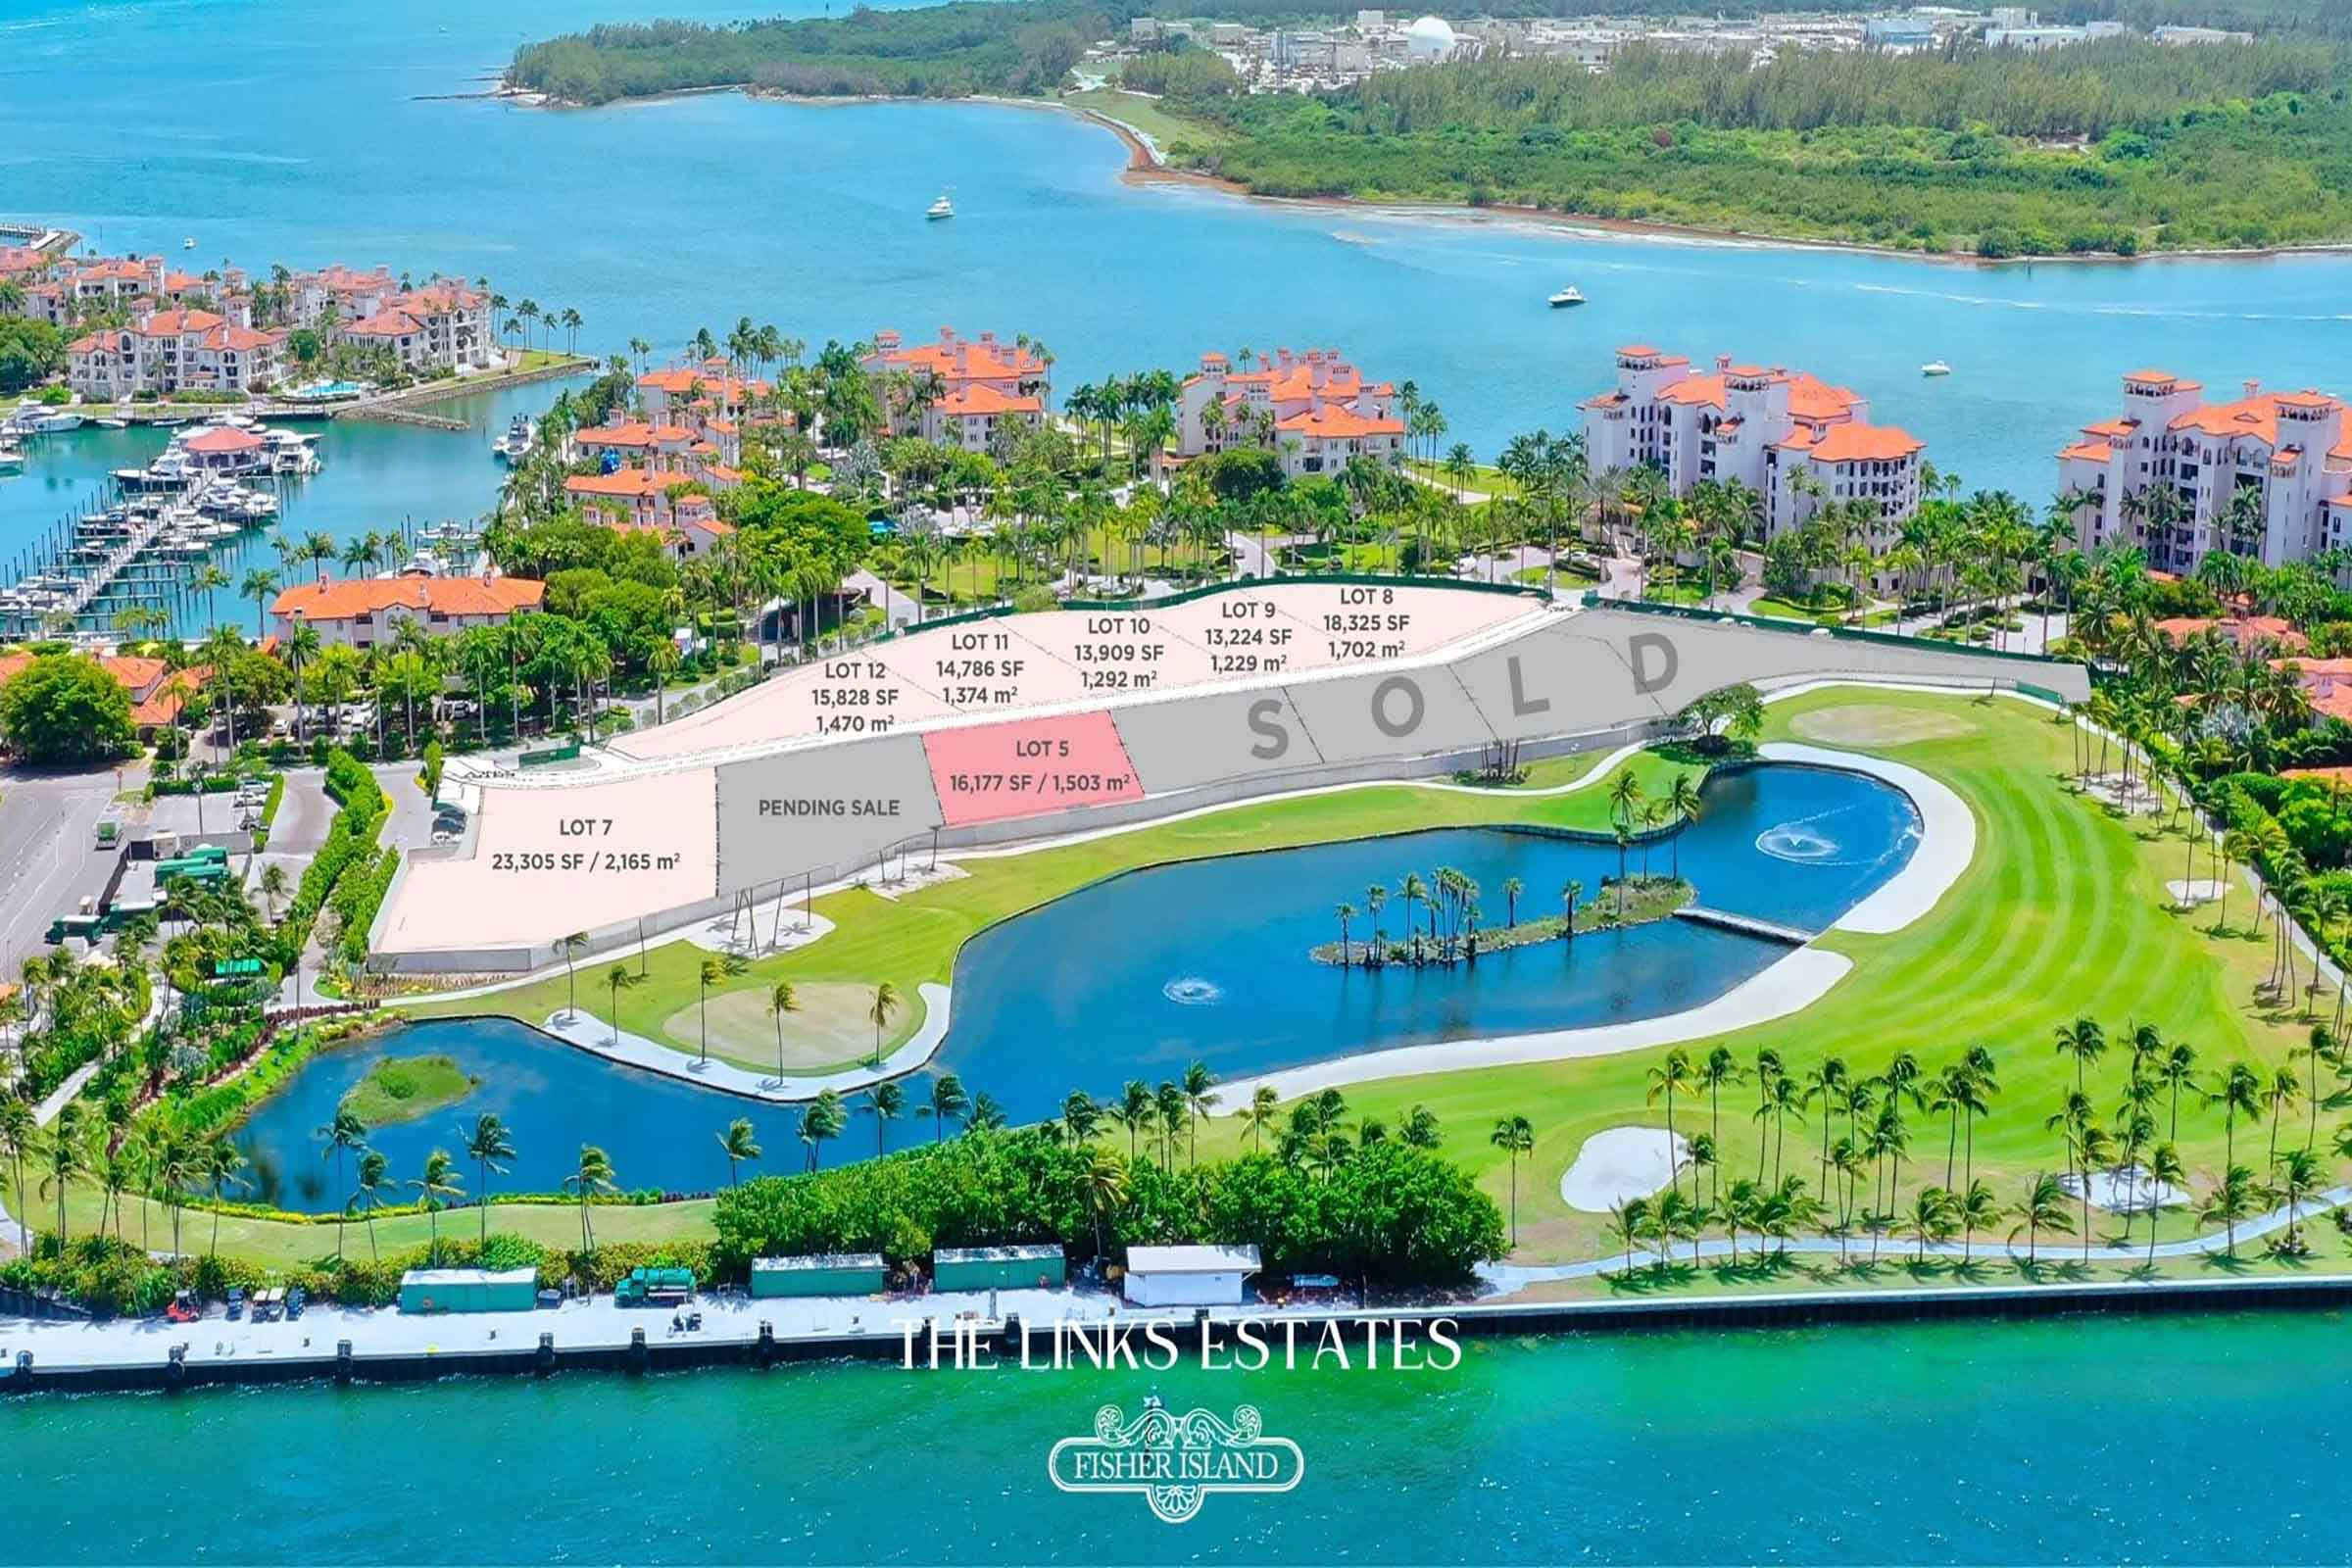 The Links Estates Fisher Island Plat Map Golf Course